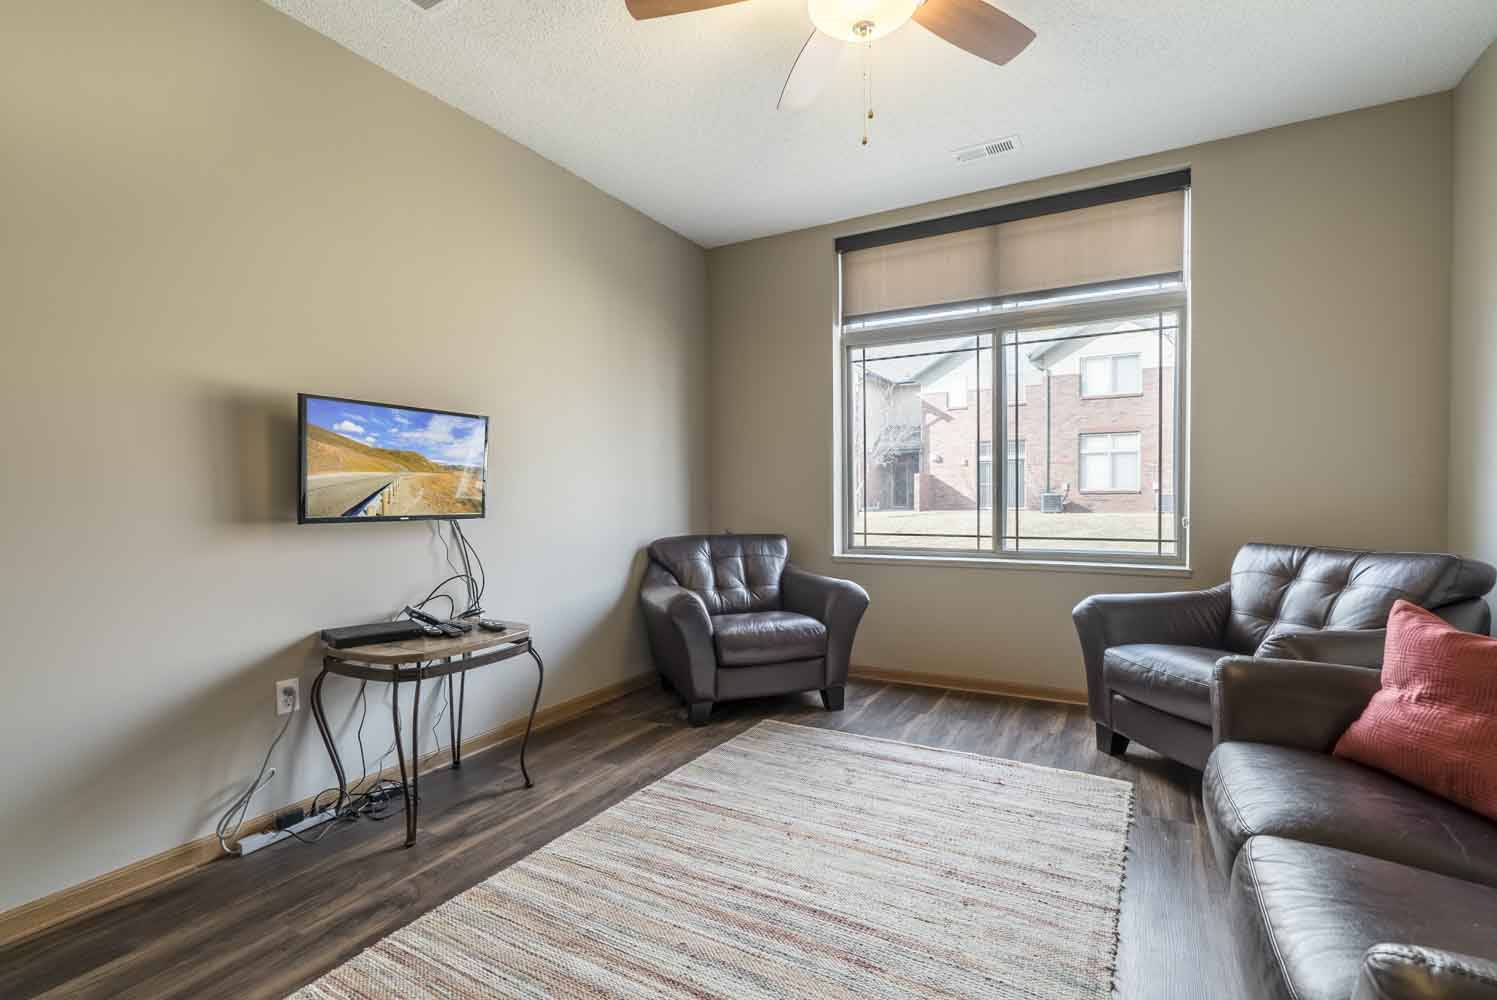 Living room in a two-bedroom townhome at Southwind Villas in southwest Omaha in La Vista, NE, 68128